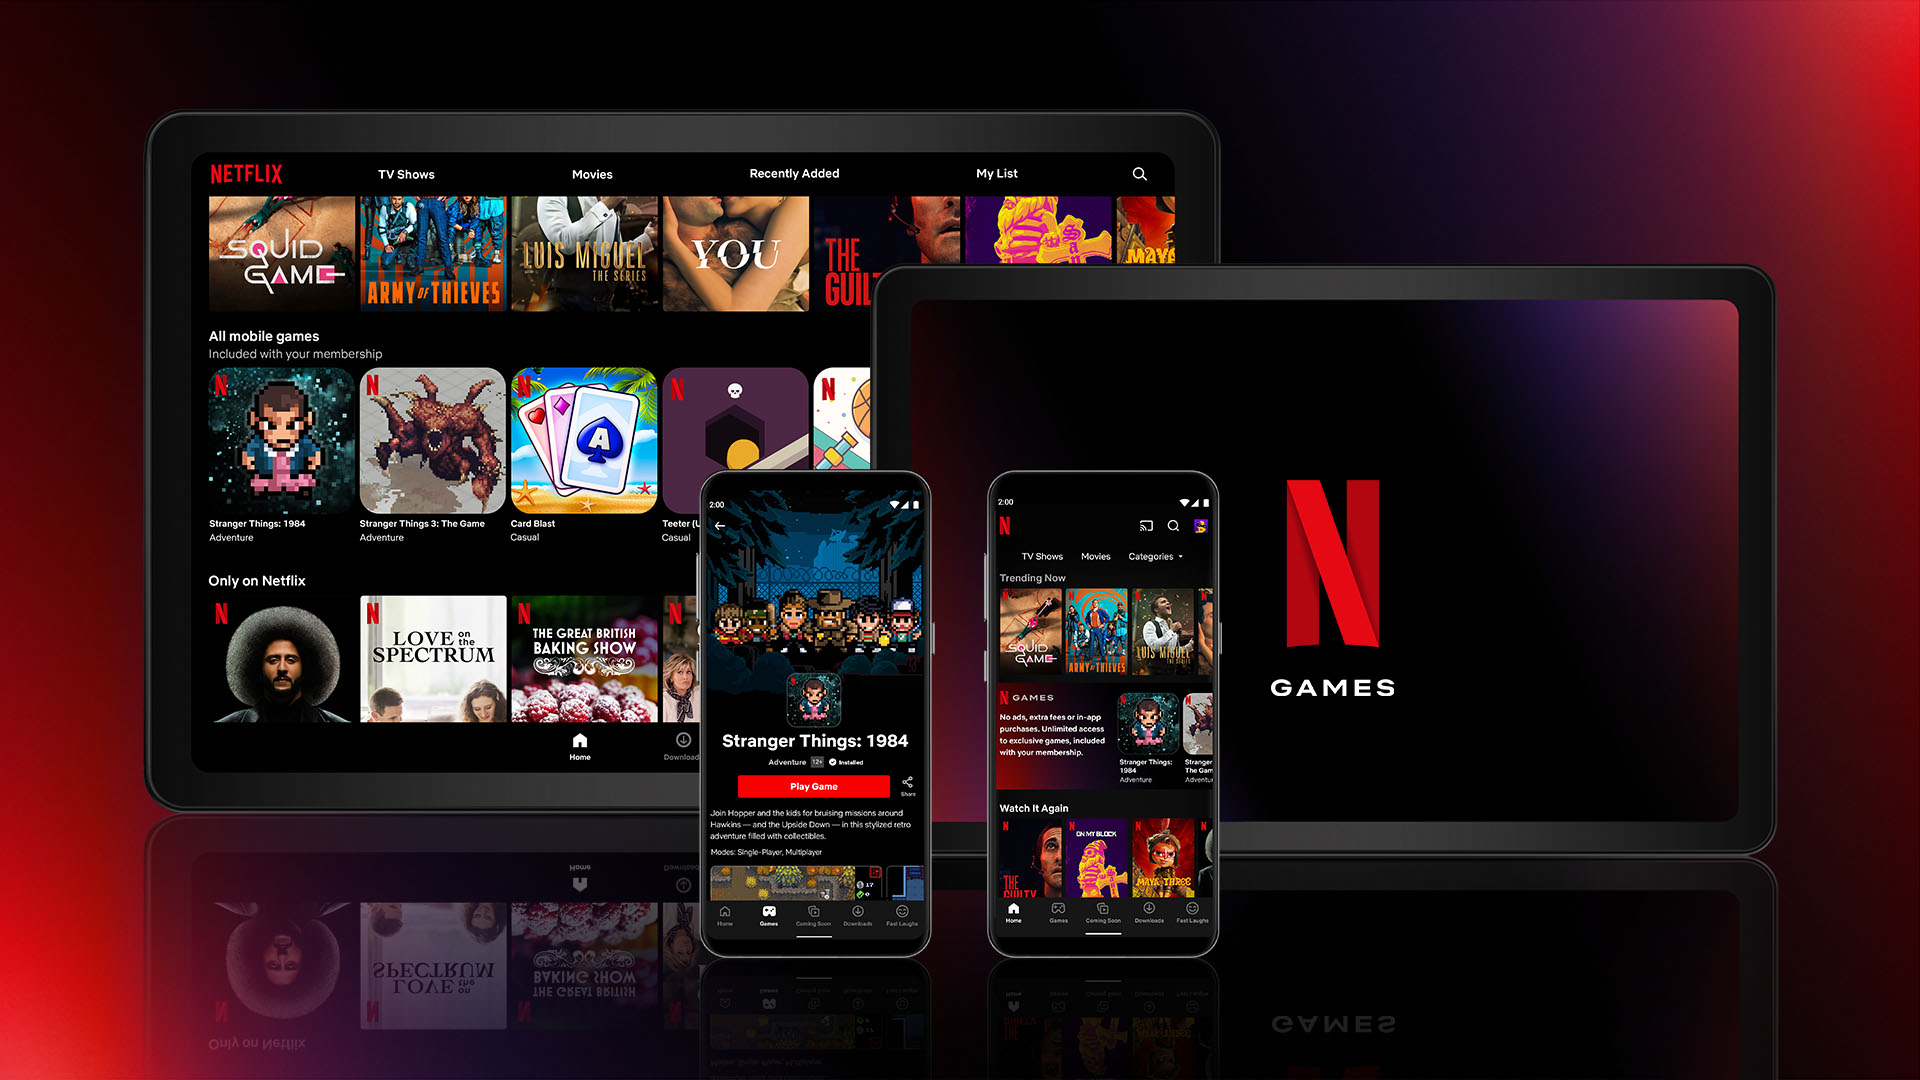 A variety of devices running Netflix's variety of games